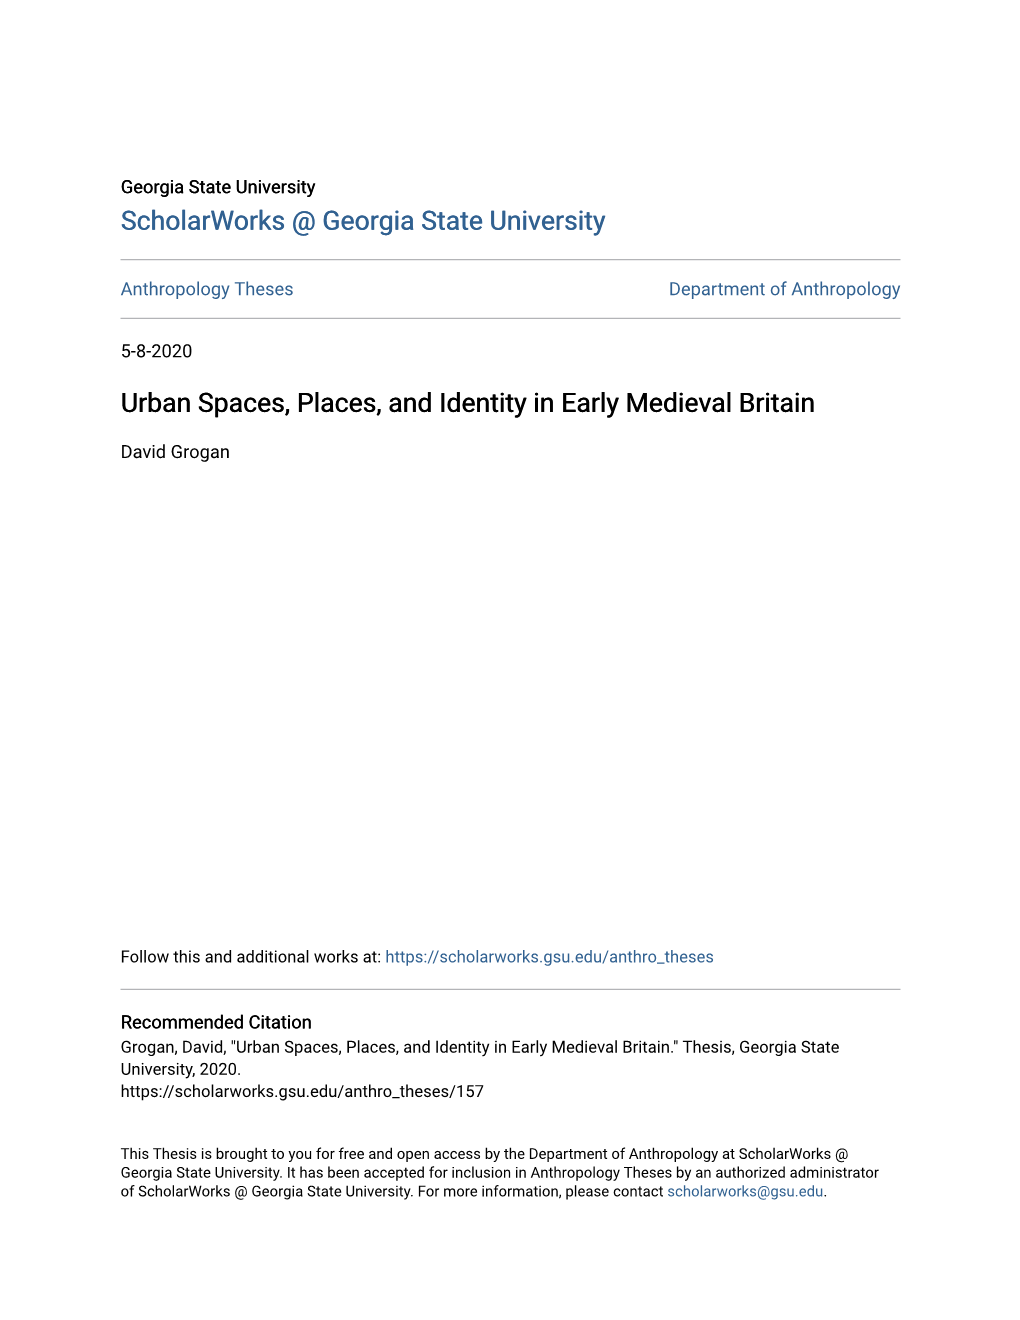 Urban Spaces, Places, and Identity in Early Medieval Britain